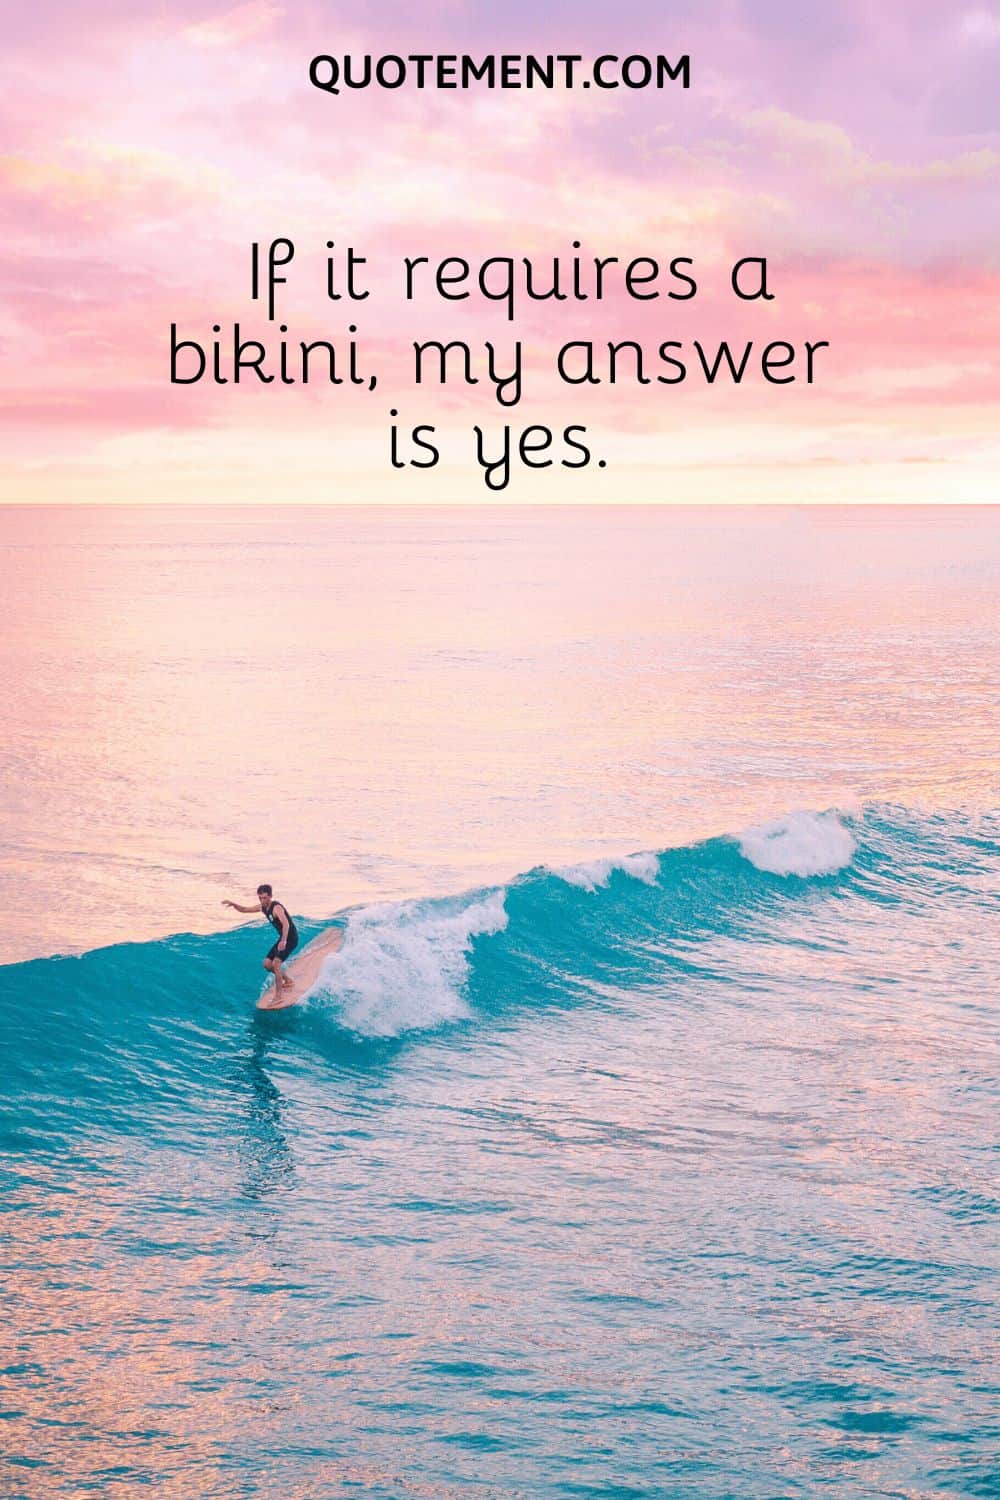 If it requires a bikini, my answer is yes.